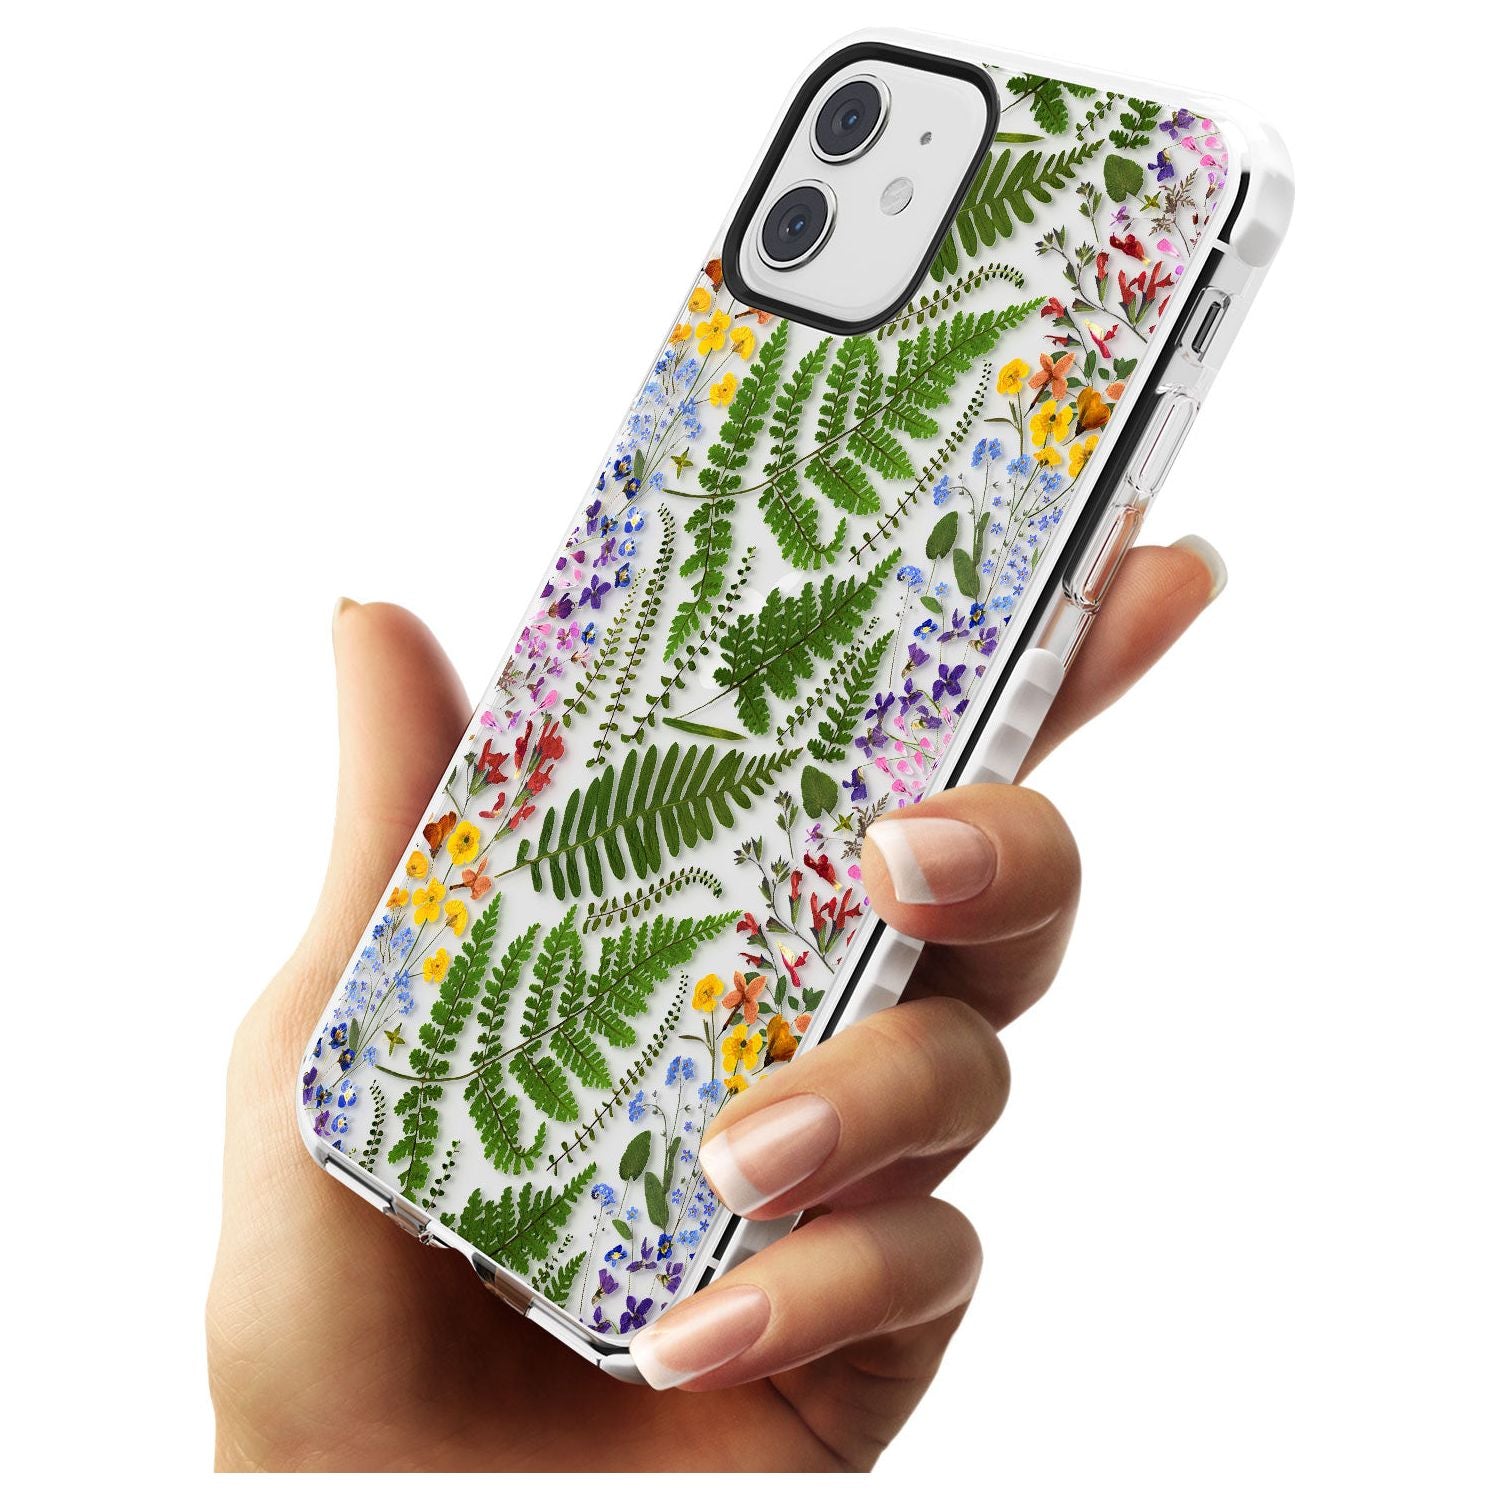 Busy Floral and Fern Design Impact Phone Case for iPhone 11